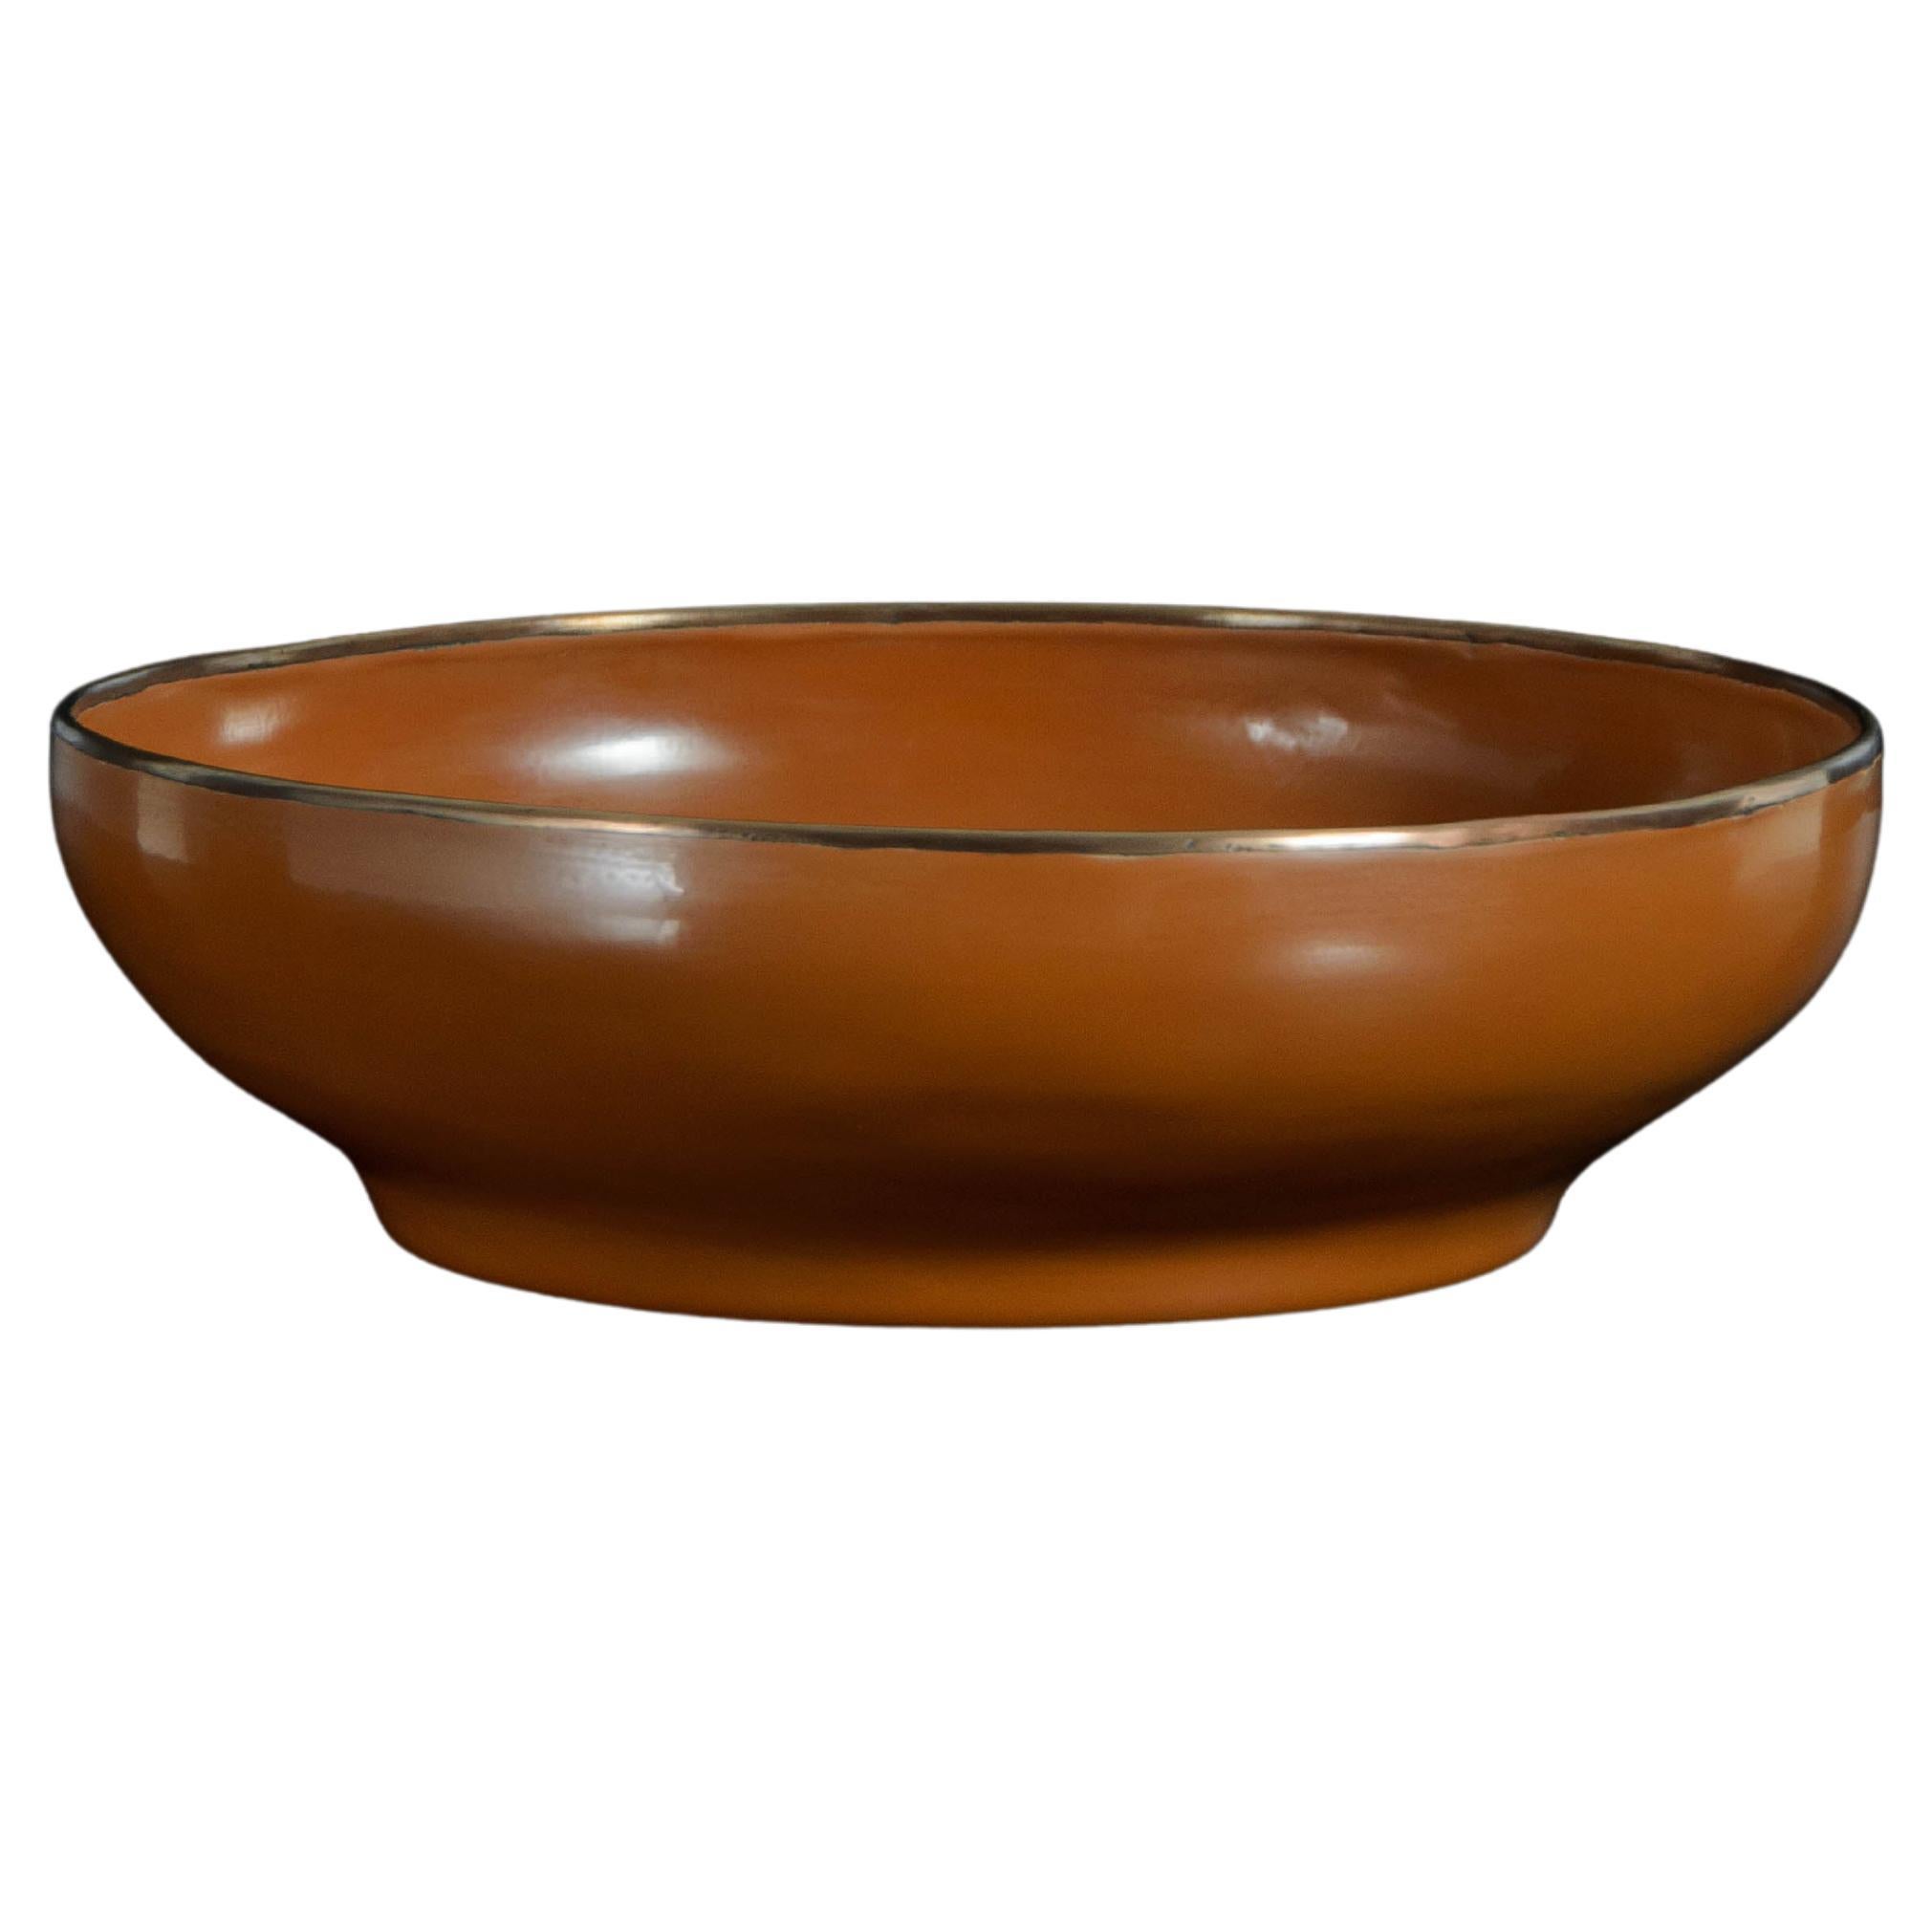 Contemporary Large Footed Bowl W/ Copper Rim in Mila Lacquer by Robert Kuo